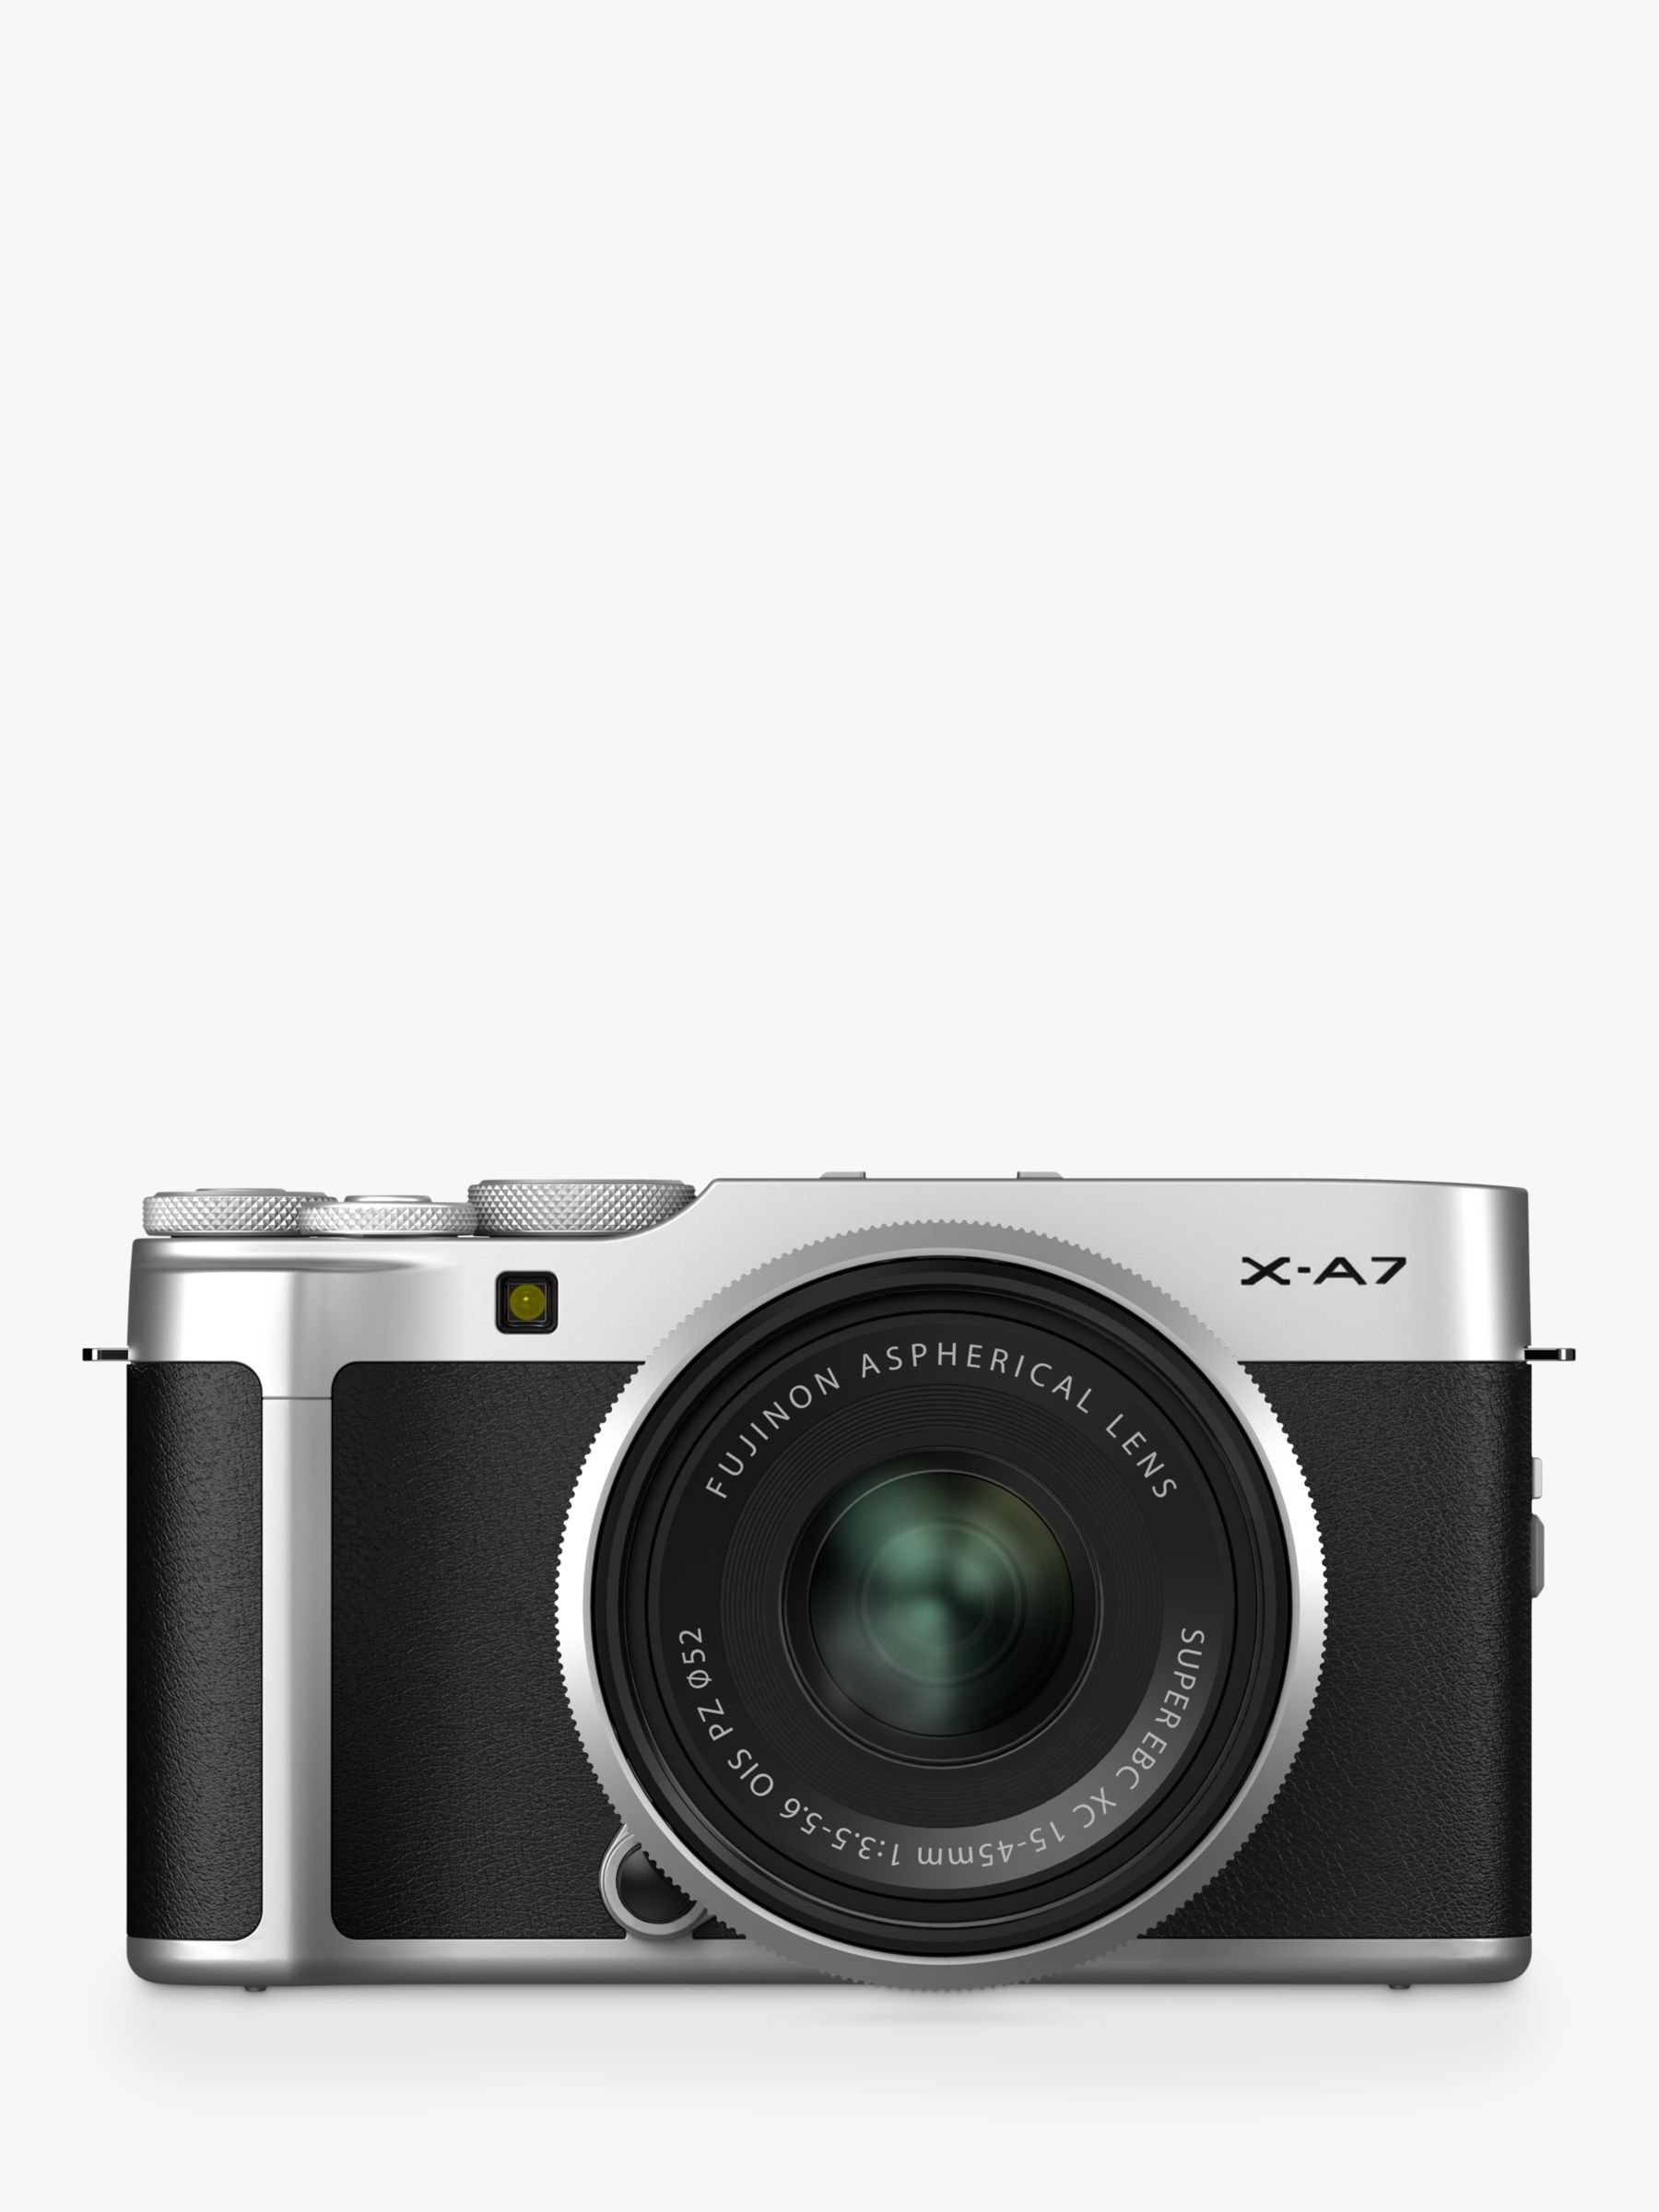 Image of Fujifilm XA7 Compact System Camera with XC 1545mm OIS Lens 4K Ultra HD 242MP WiFi Bluetooth 35 Variangle LCD Touch Screen Black and Silver